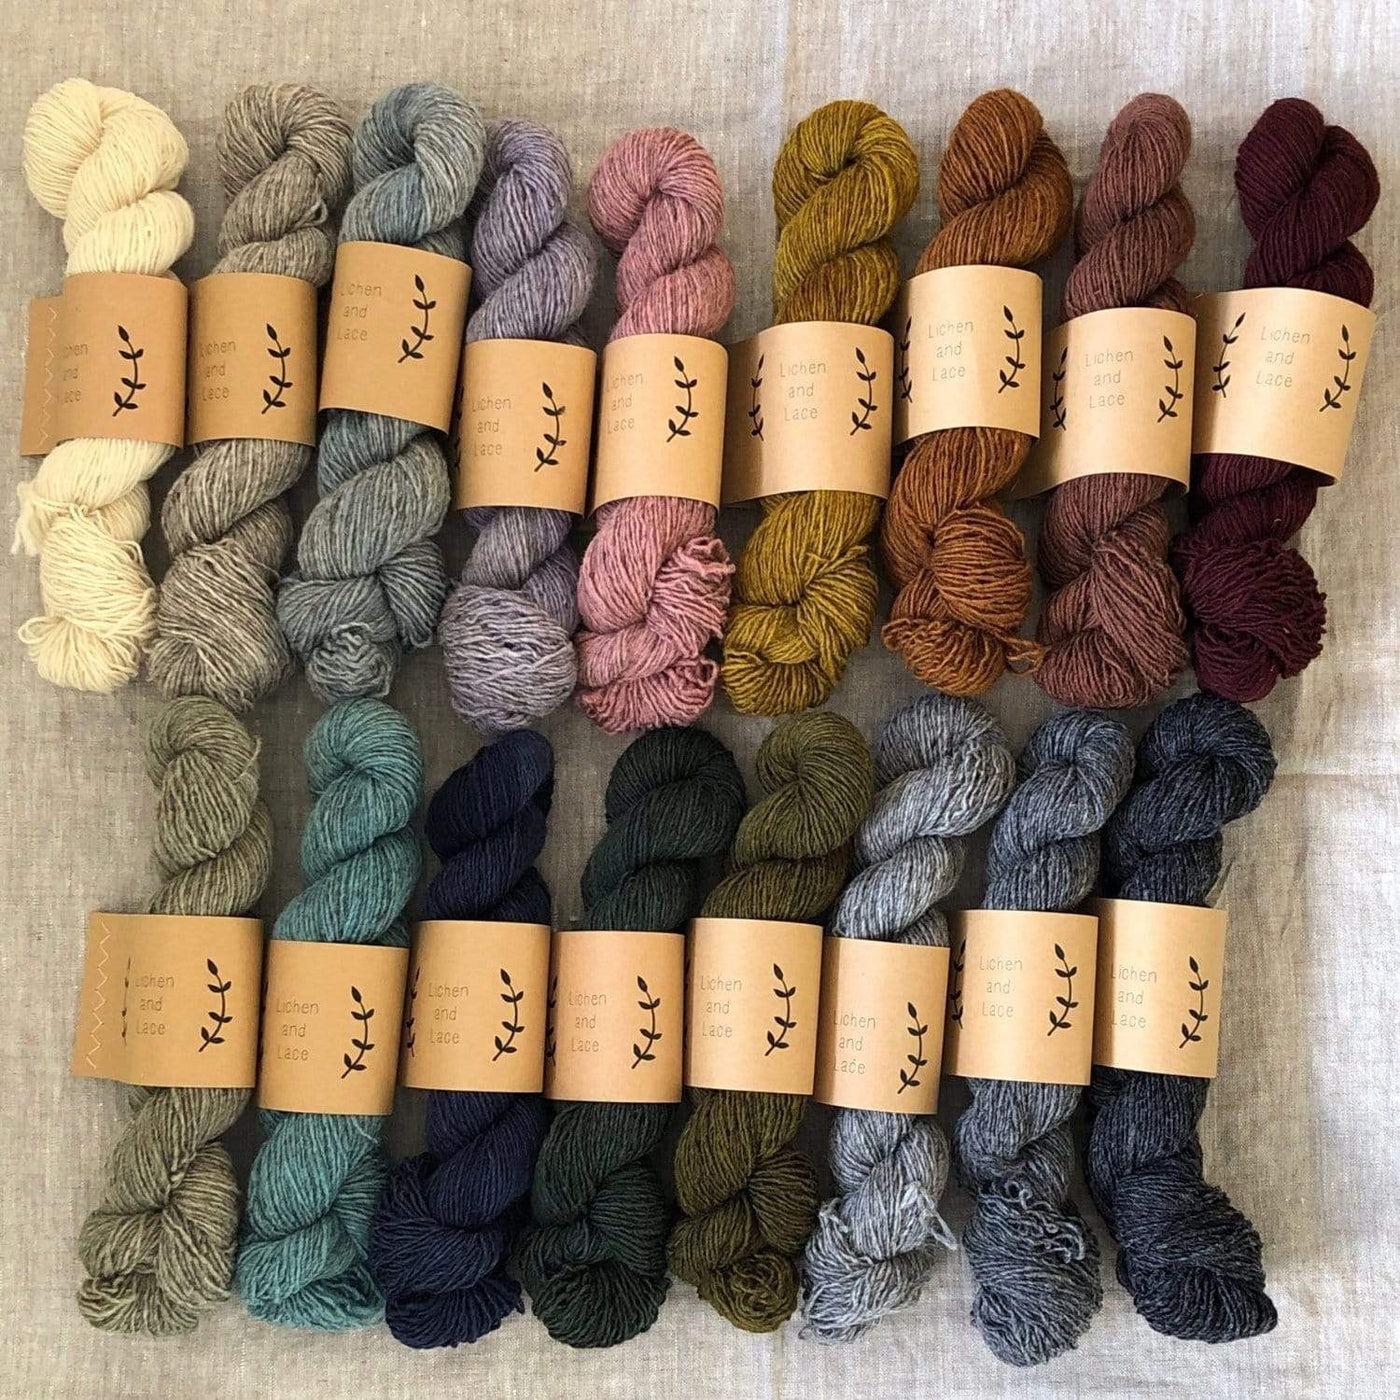 The range of colors in Lichen & Lace Rustic Heather Sport, a sport weight single-ply yarn,